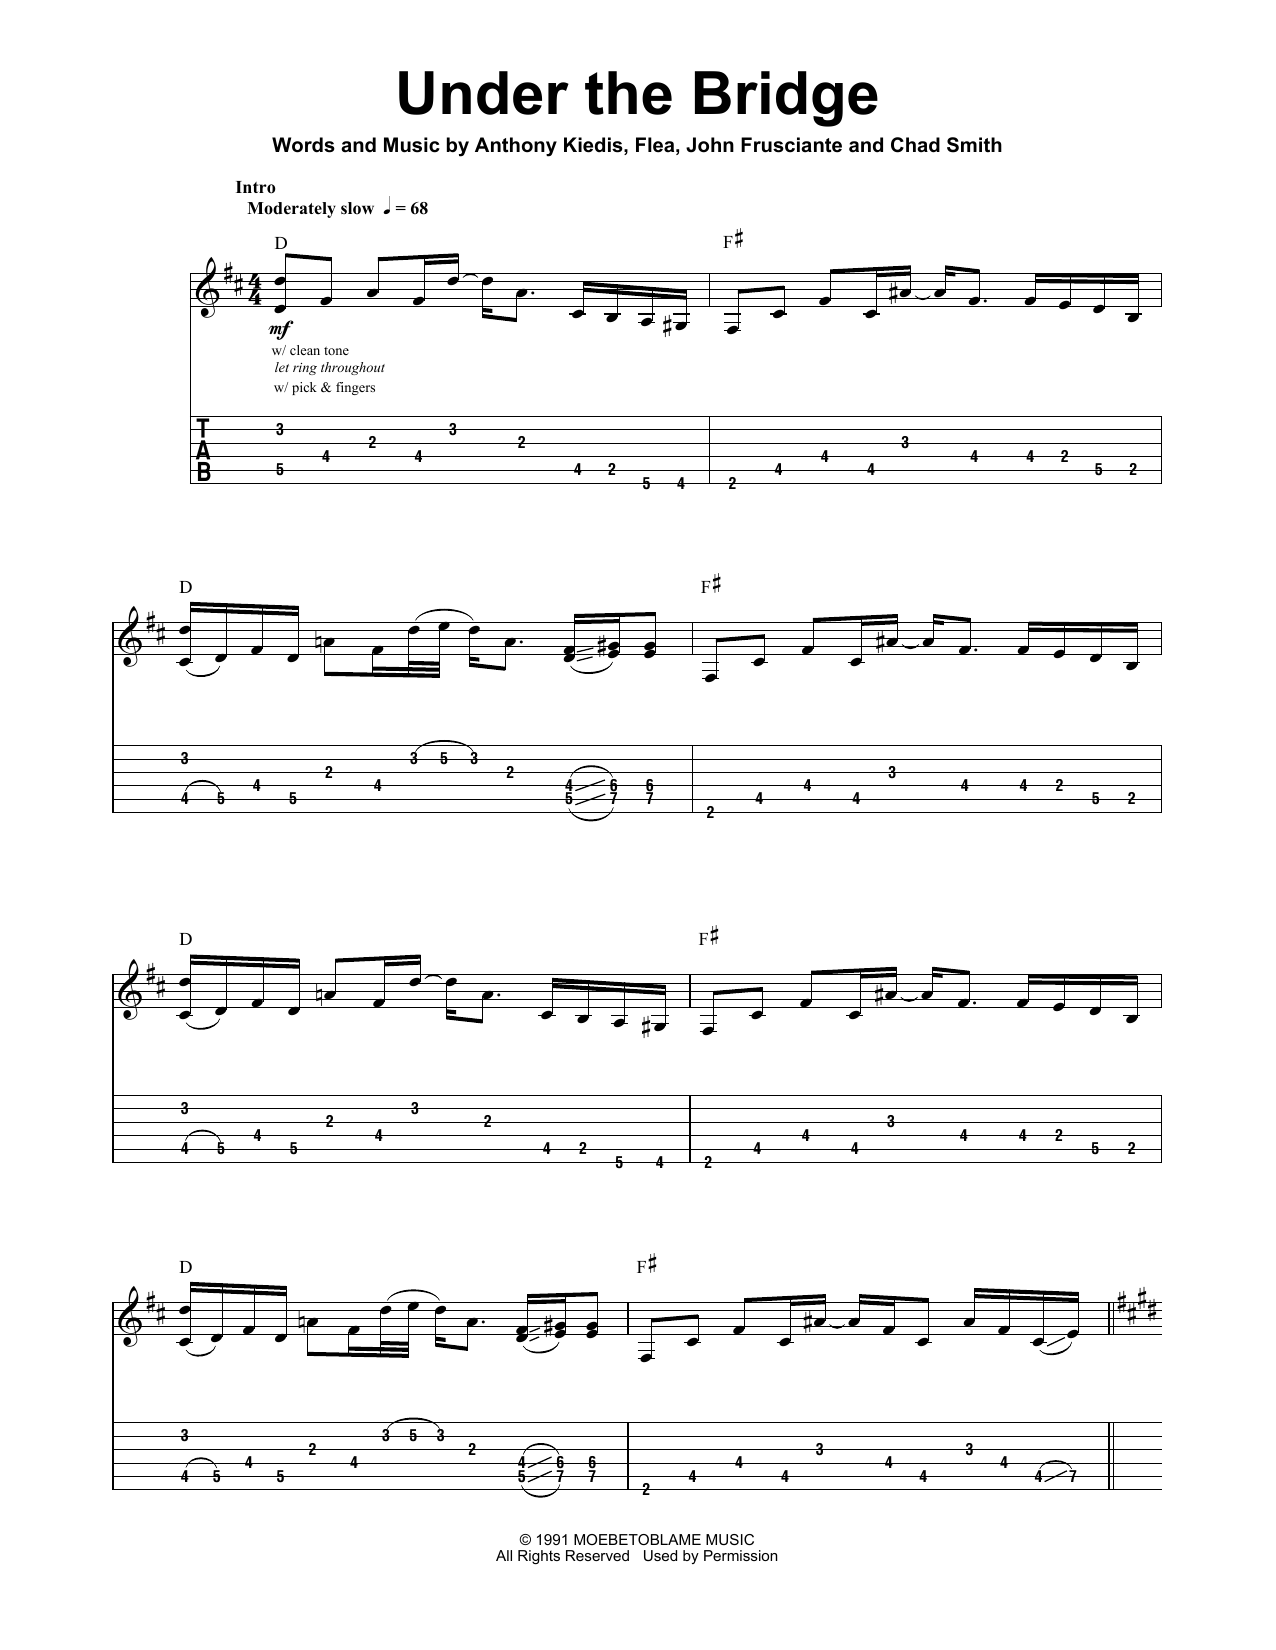 Red Hot Chili Peppers Under The Bridge sheet music notes and chords. Download Printable PDF.